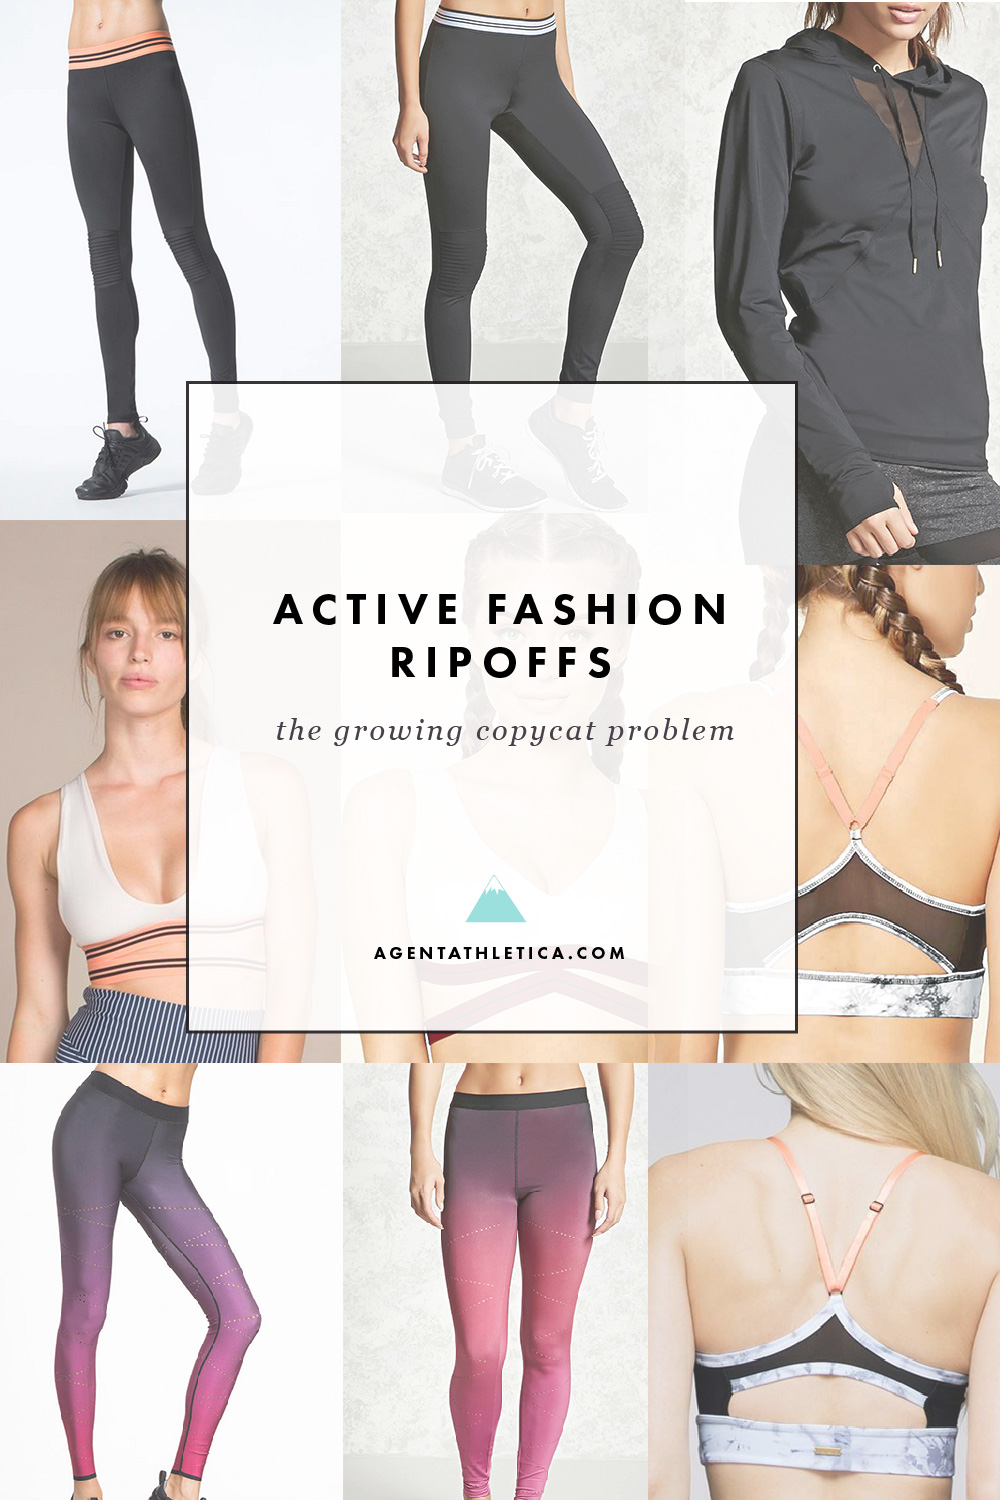 Sports Luxe Athleisure: Sweaty Betty - Agent Athletica  Athleisure  fashion, Athleisure trend, How to make clothes